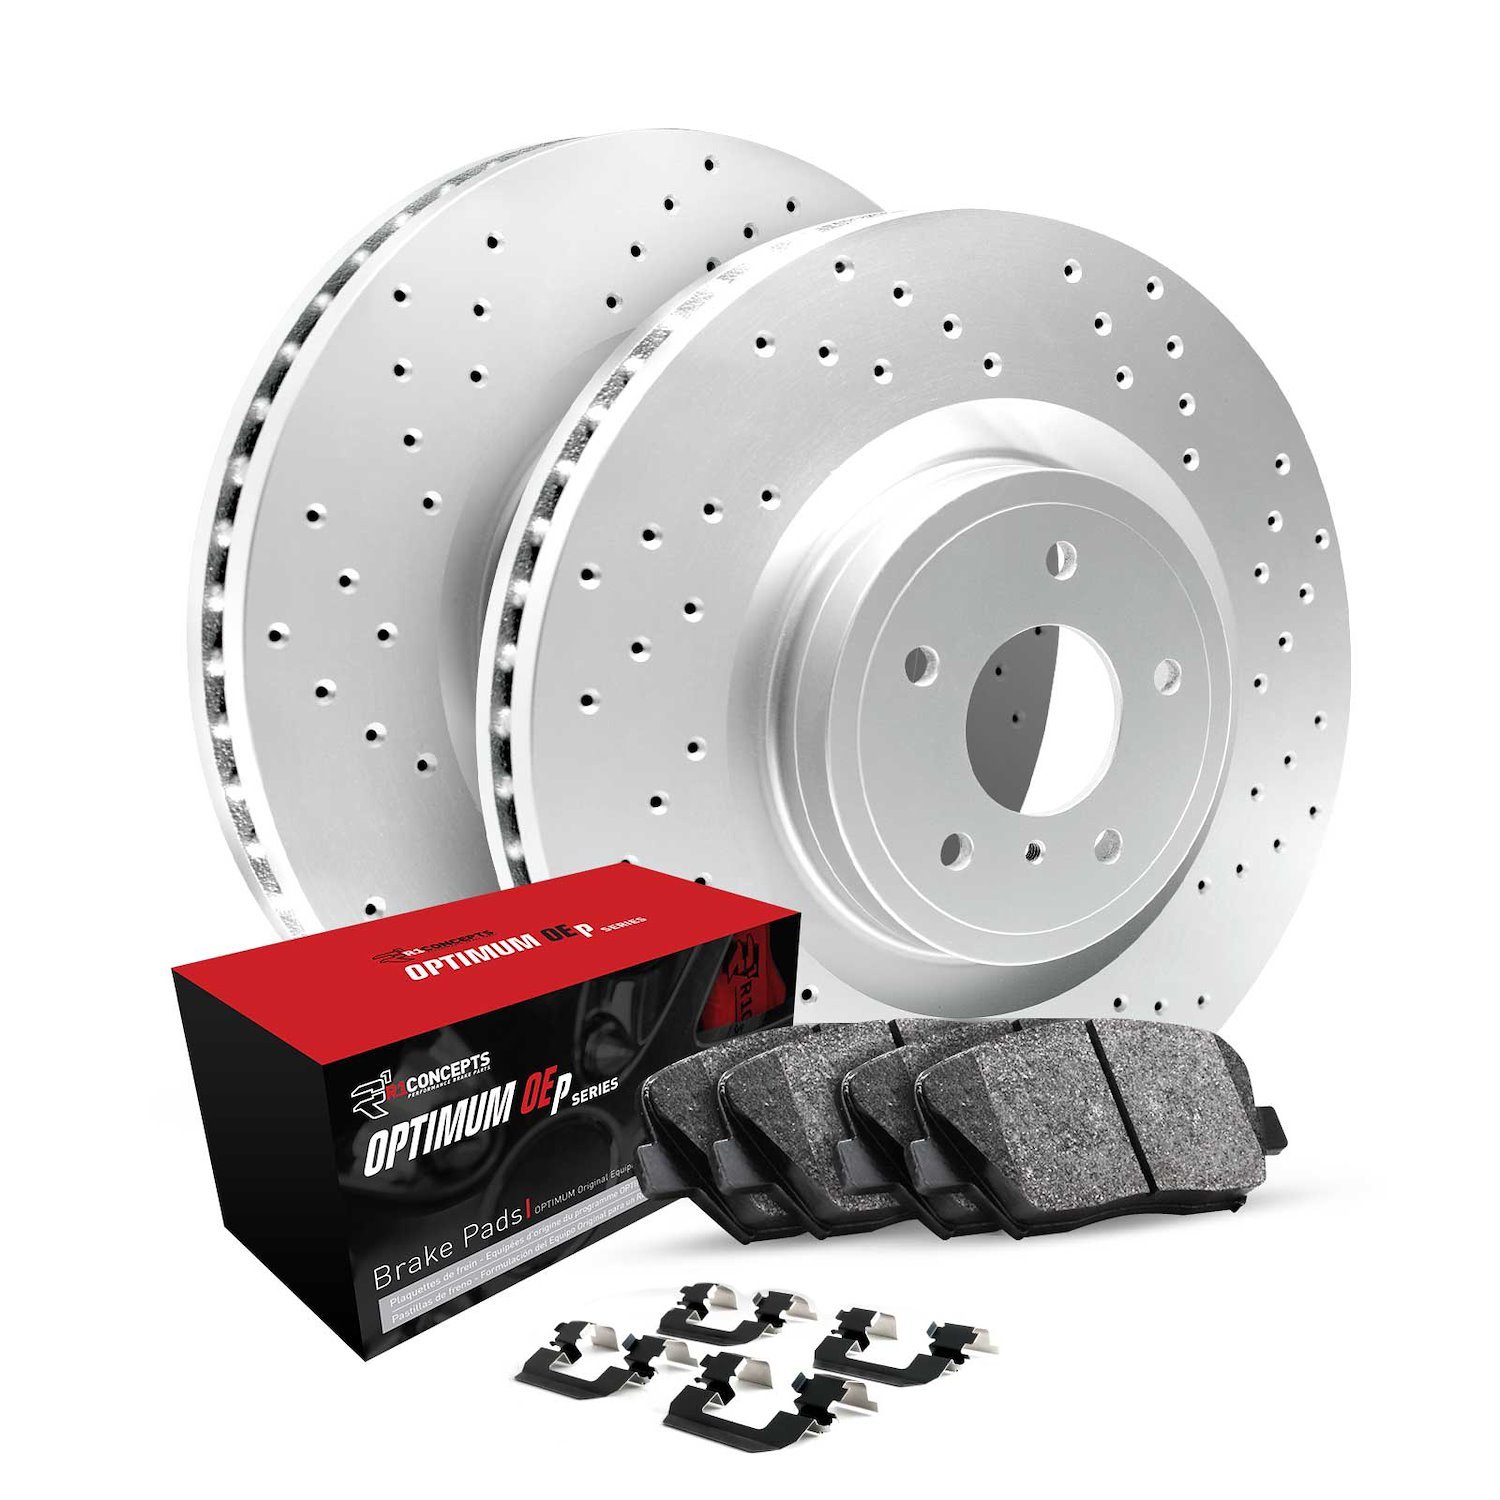 GEO-Carbon Drilled Brake Rotor Set w/Optimum OE Pads & Hardware, Fits Select Fits Multiple Makes/Models, Position: Front